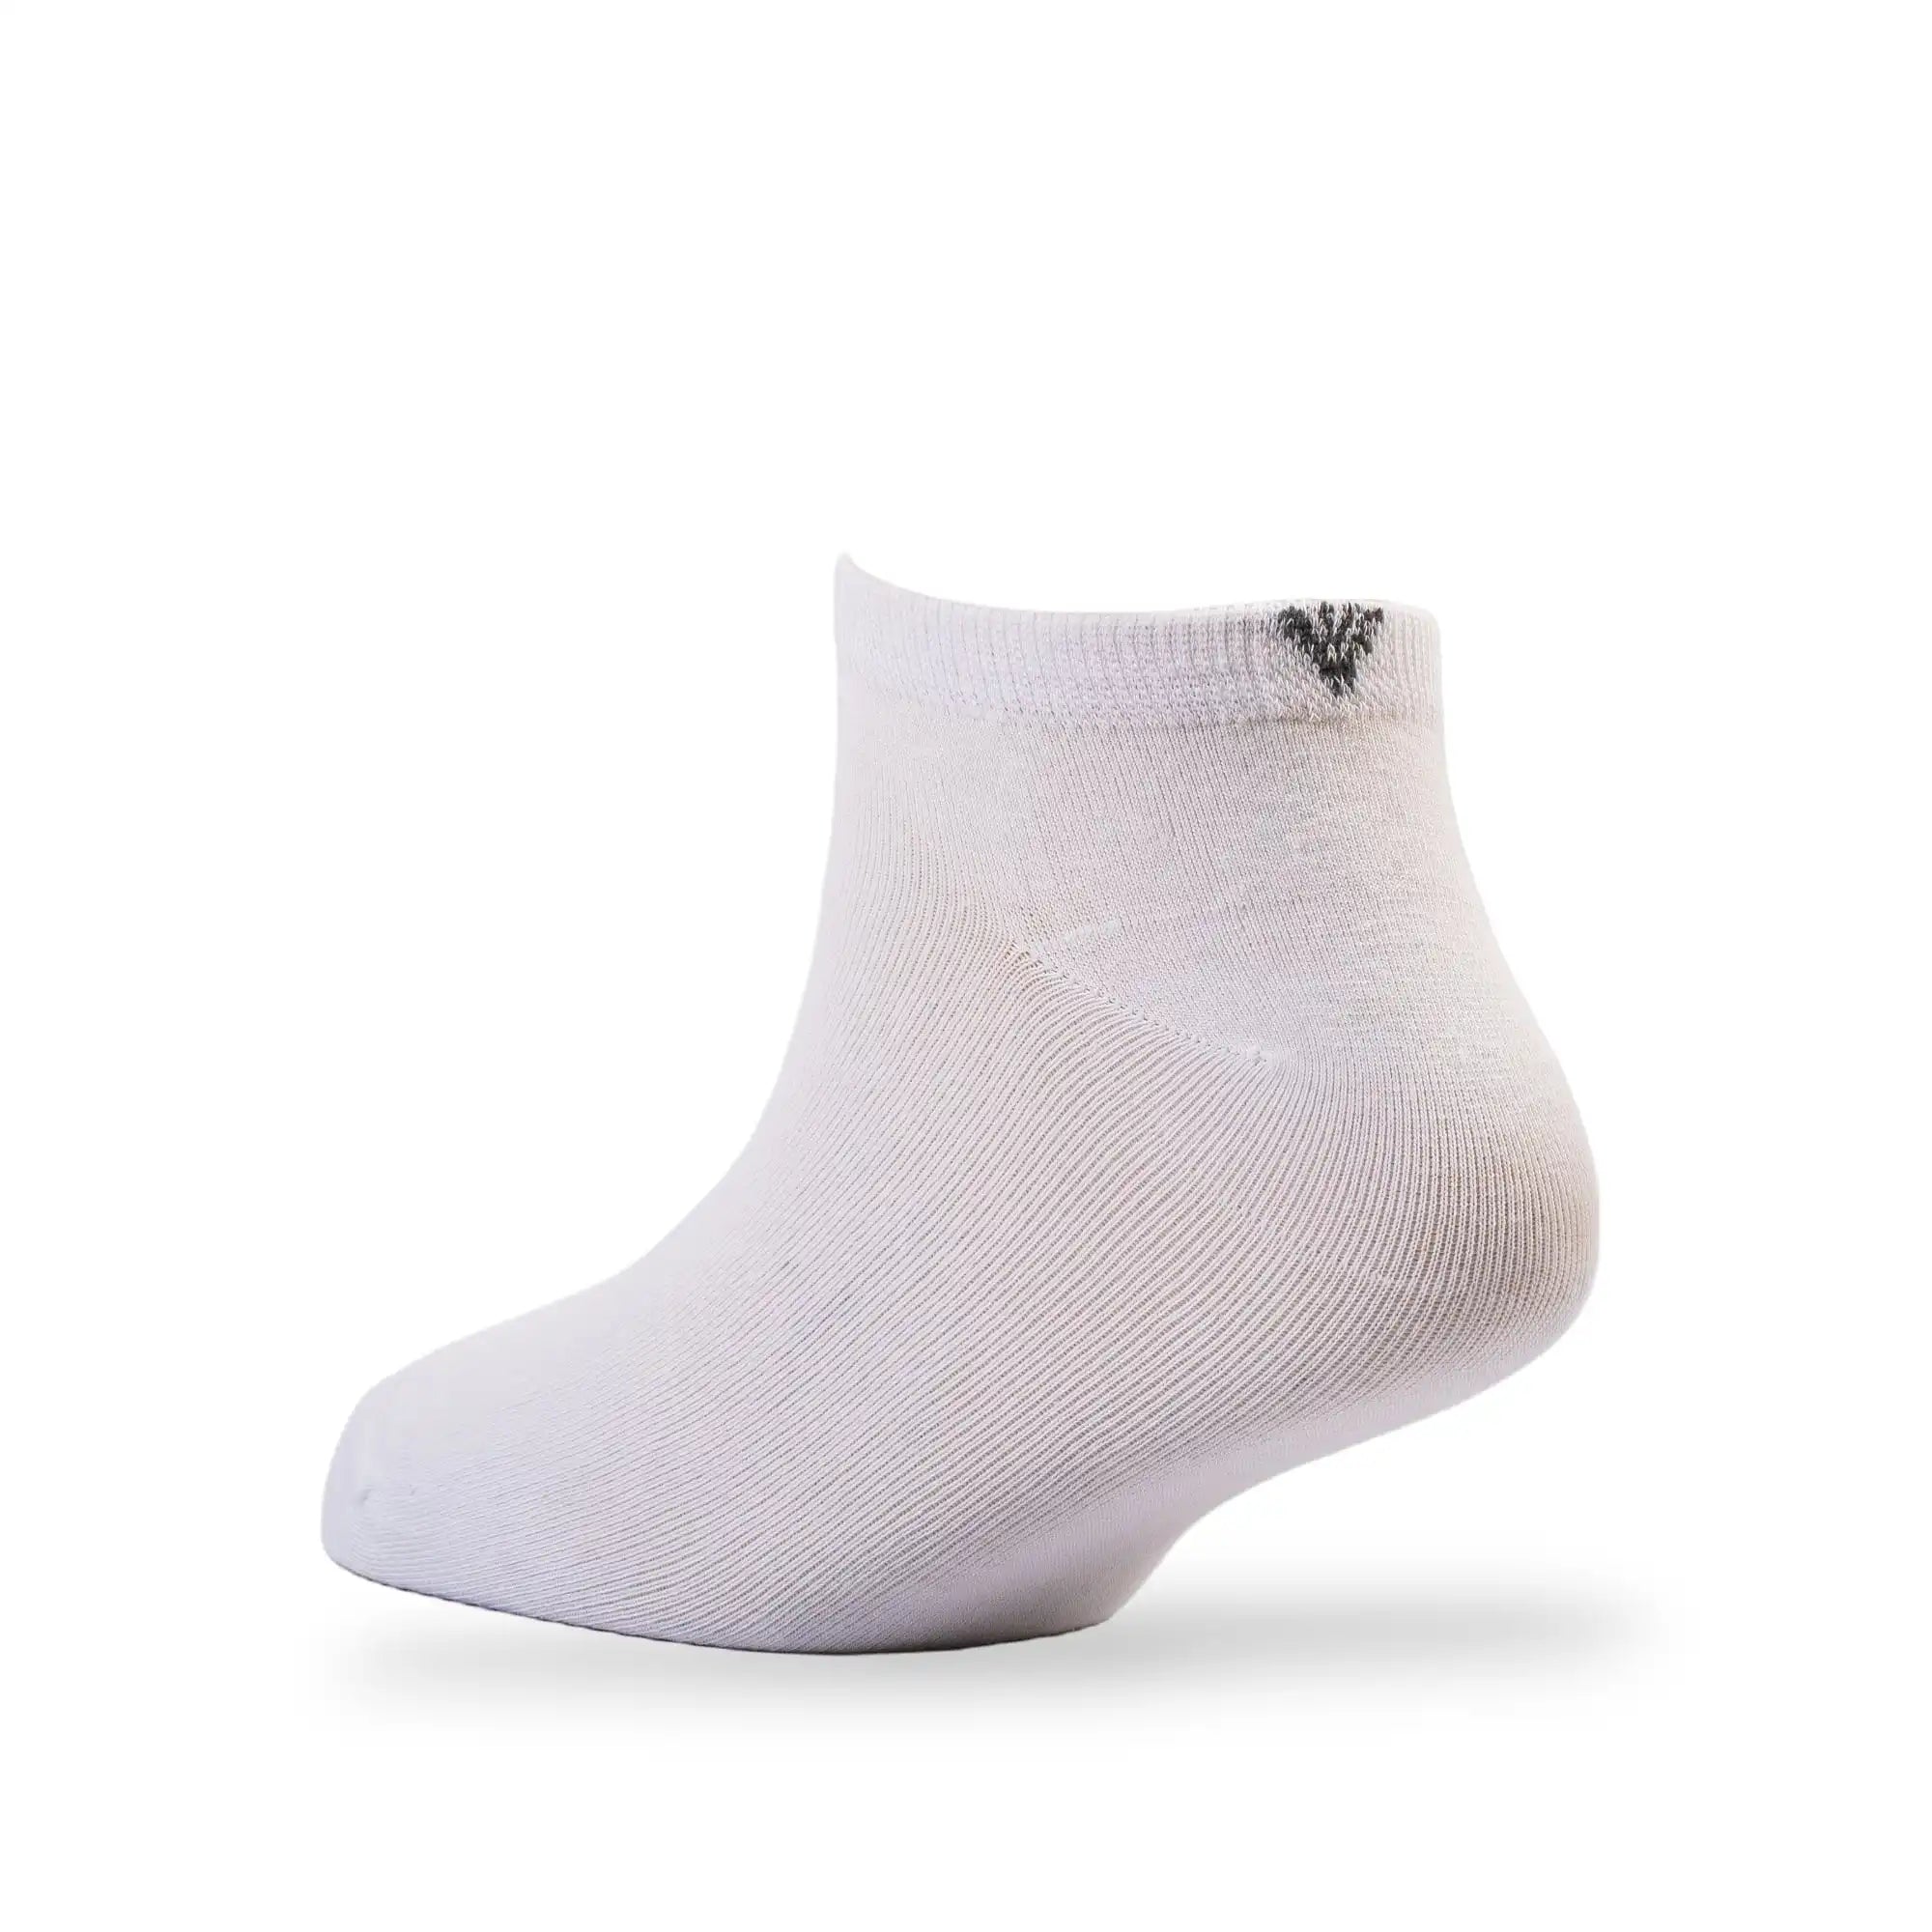 Young Wings Men's White Colour Cotton Fabric Solid Low Ankle Length Socks - Pack of 5, Style no. 1400-M1